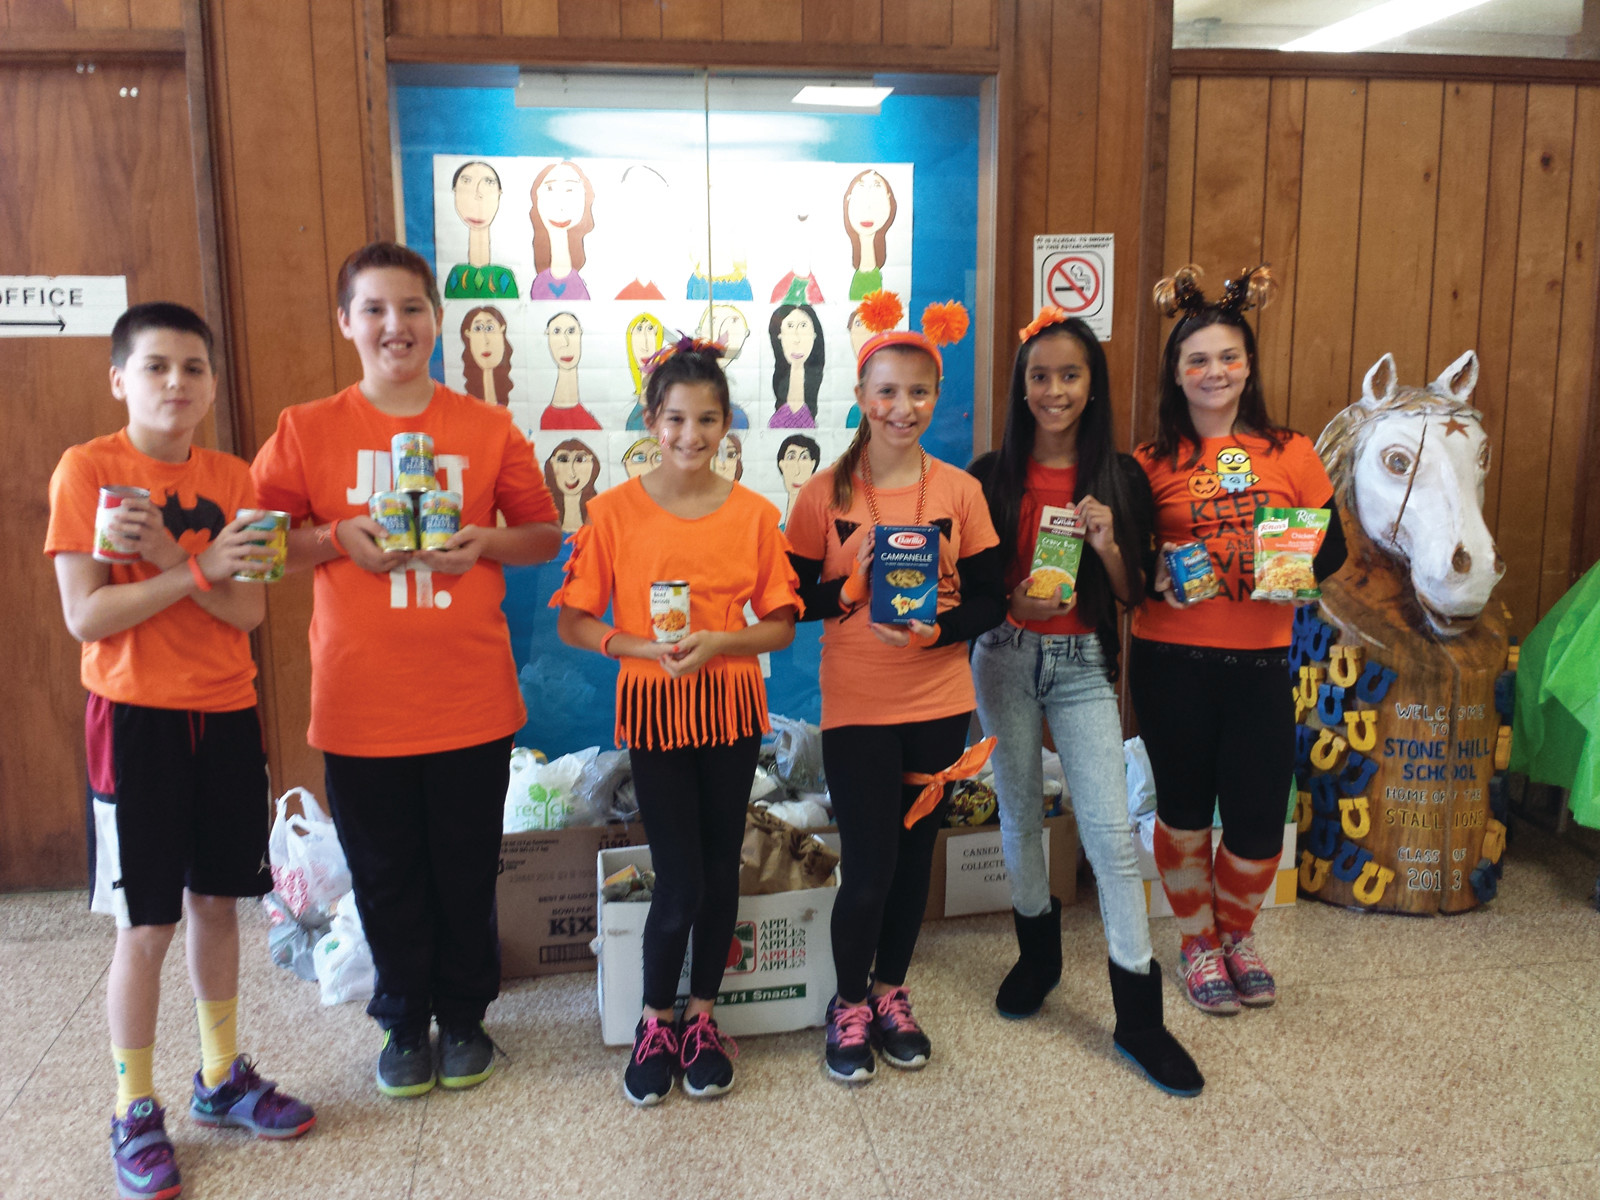 GOING ORANGE: Stone Hill Elementary School’s sixth-graders took on the “Go Orange” event for their school, selling orange bracelets and stickers in order to increase their donations for this year’s drive.